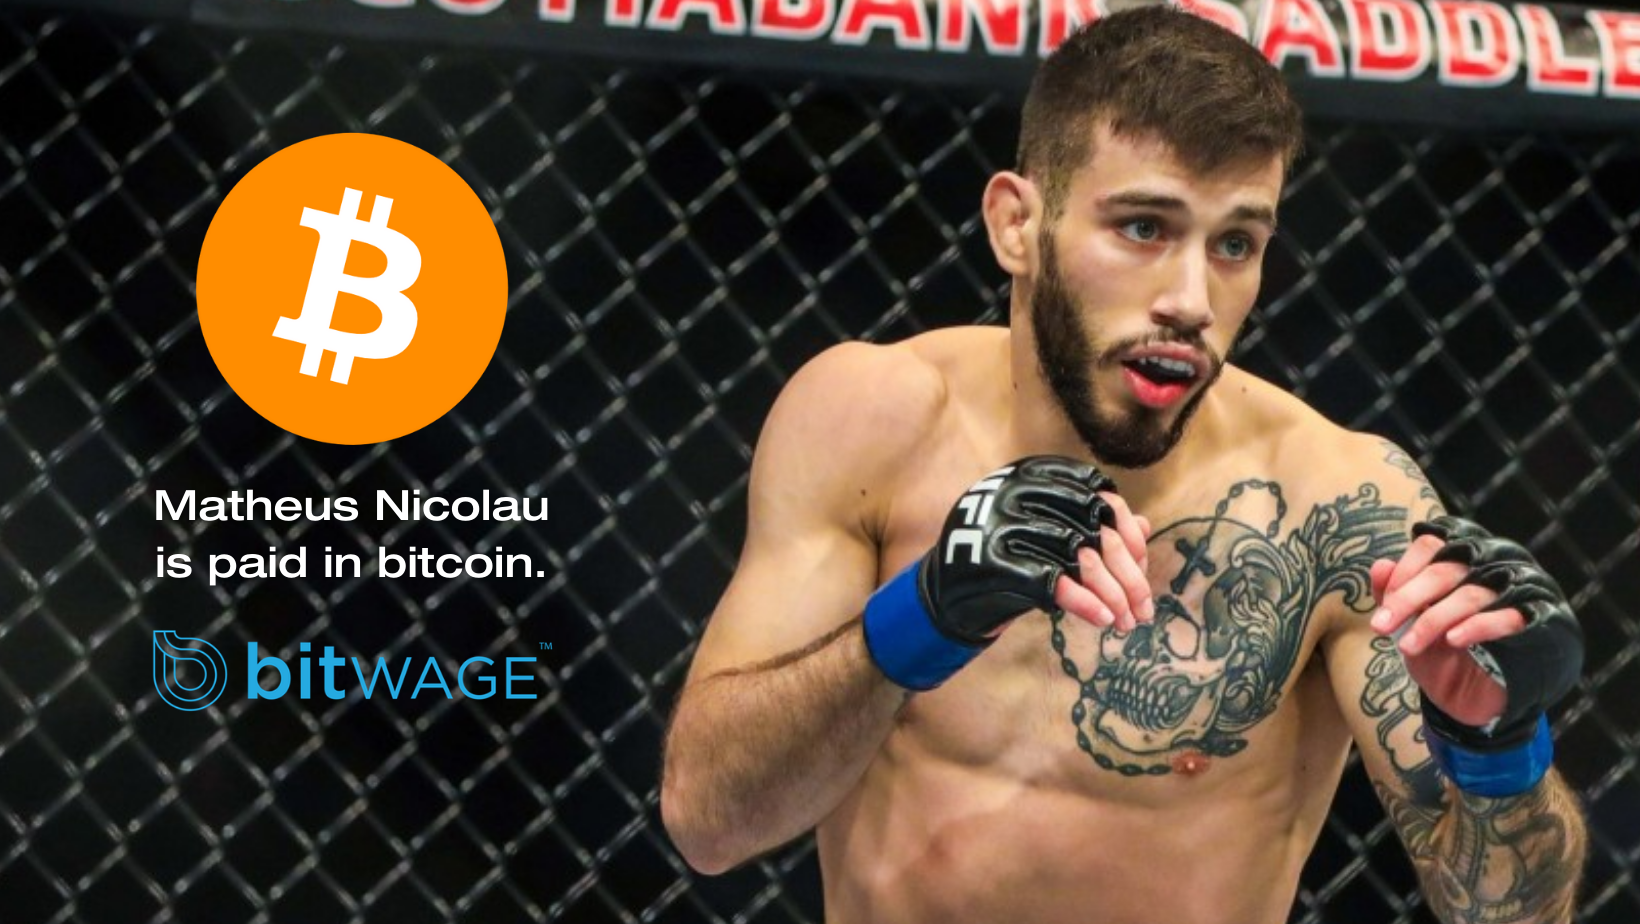 First-Ever Latin American Athlete Gets Paid in Bitcoin with Bitwage